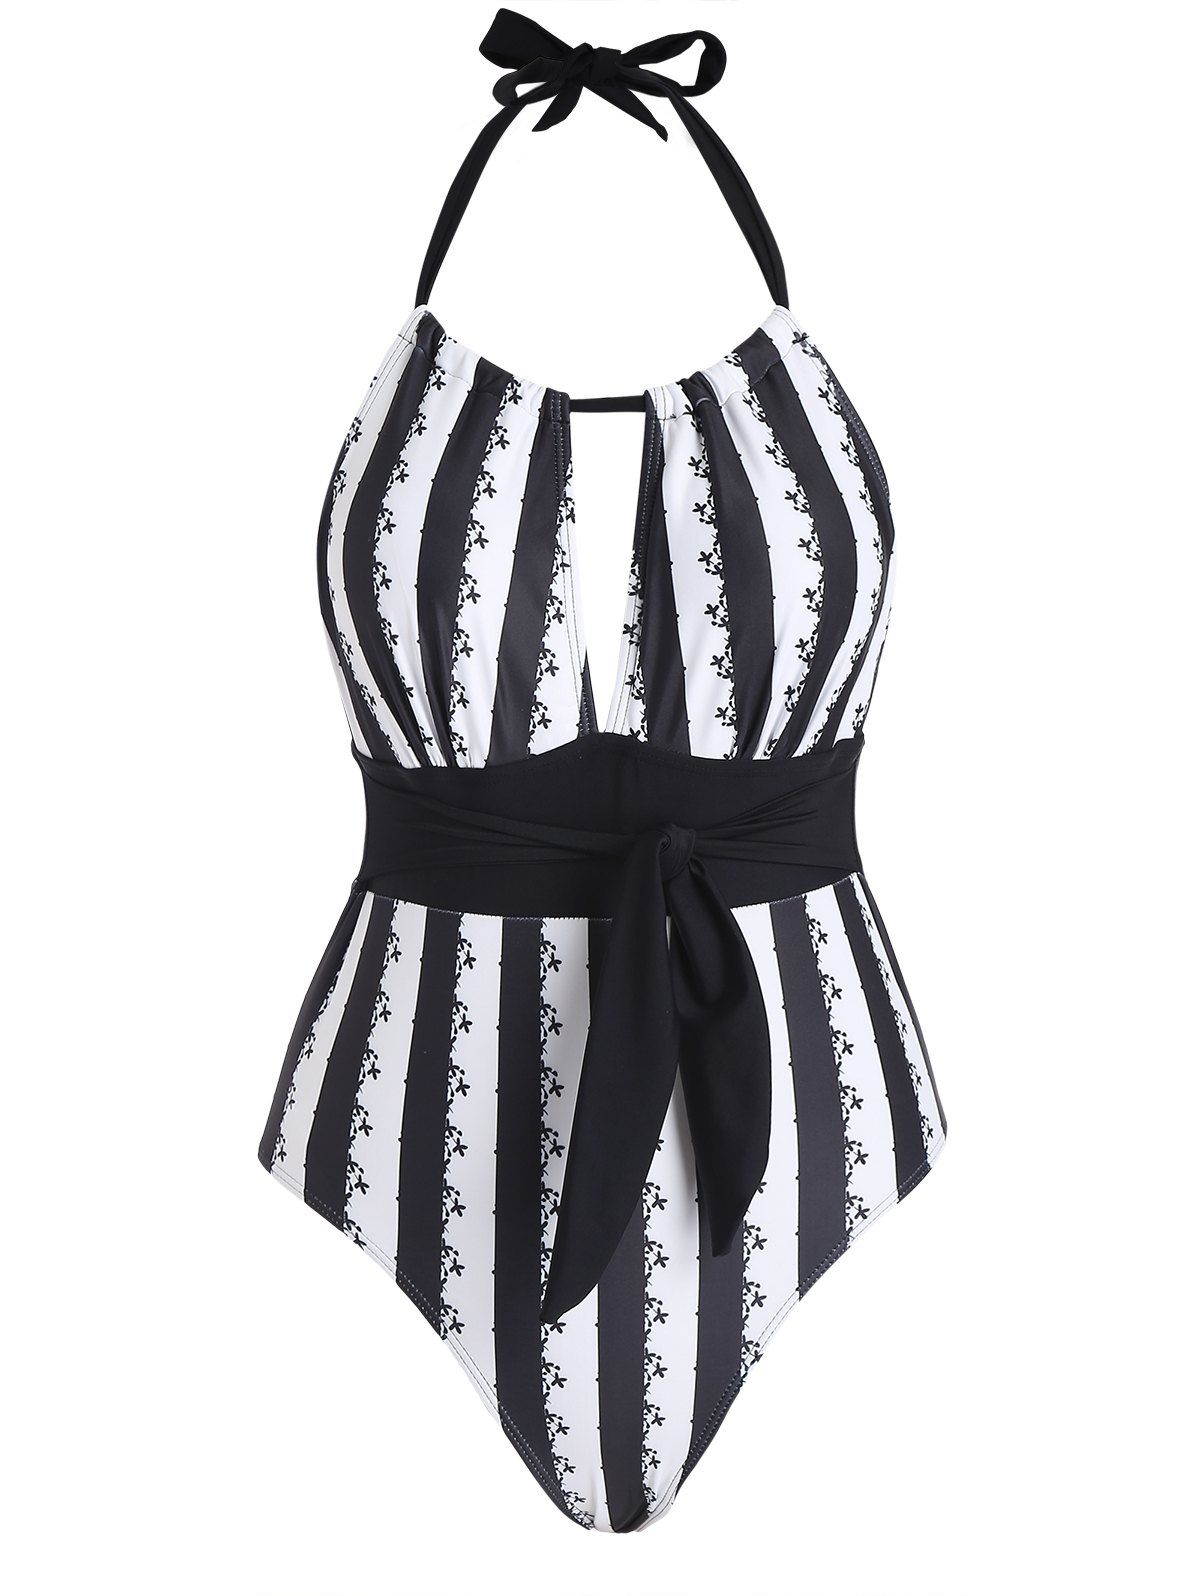 Vacation Floral Striped Print Halter One-piece Swimsuit Cut Out Self Belted Open Back Swimwear - BLACK XL